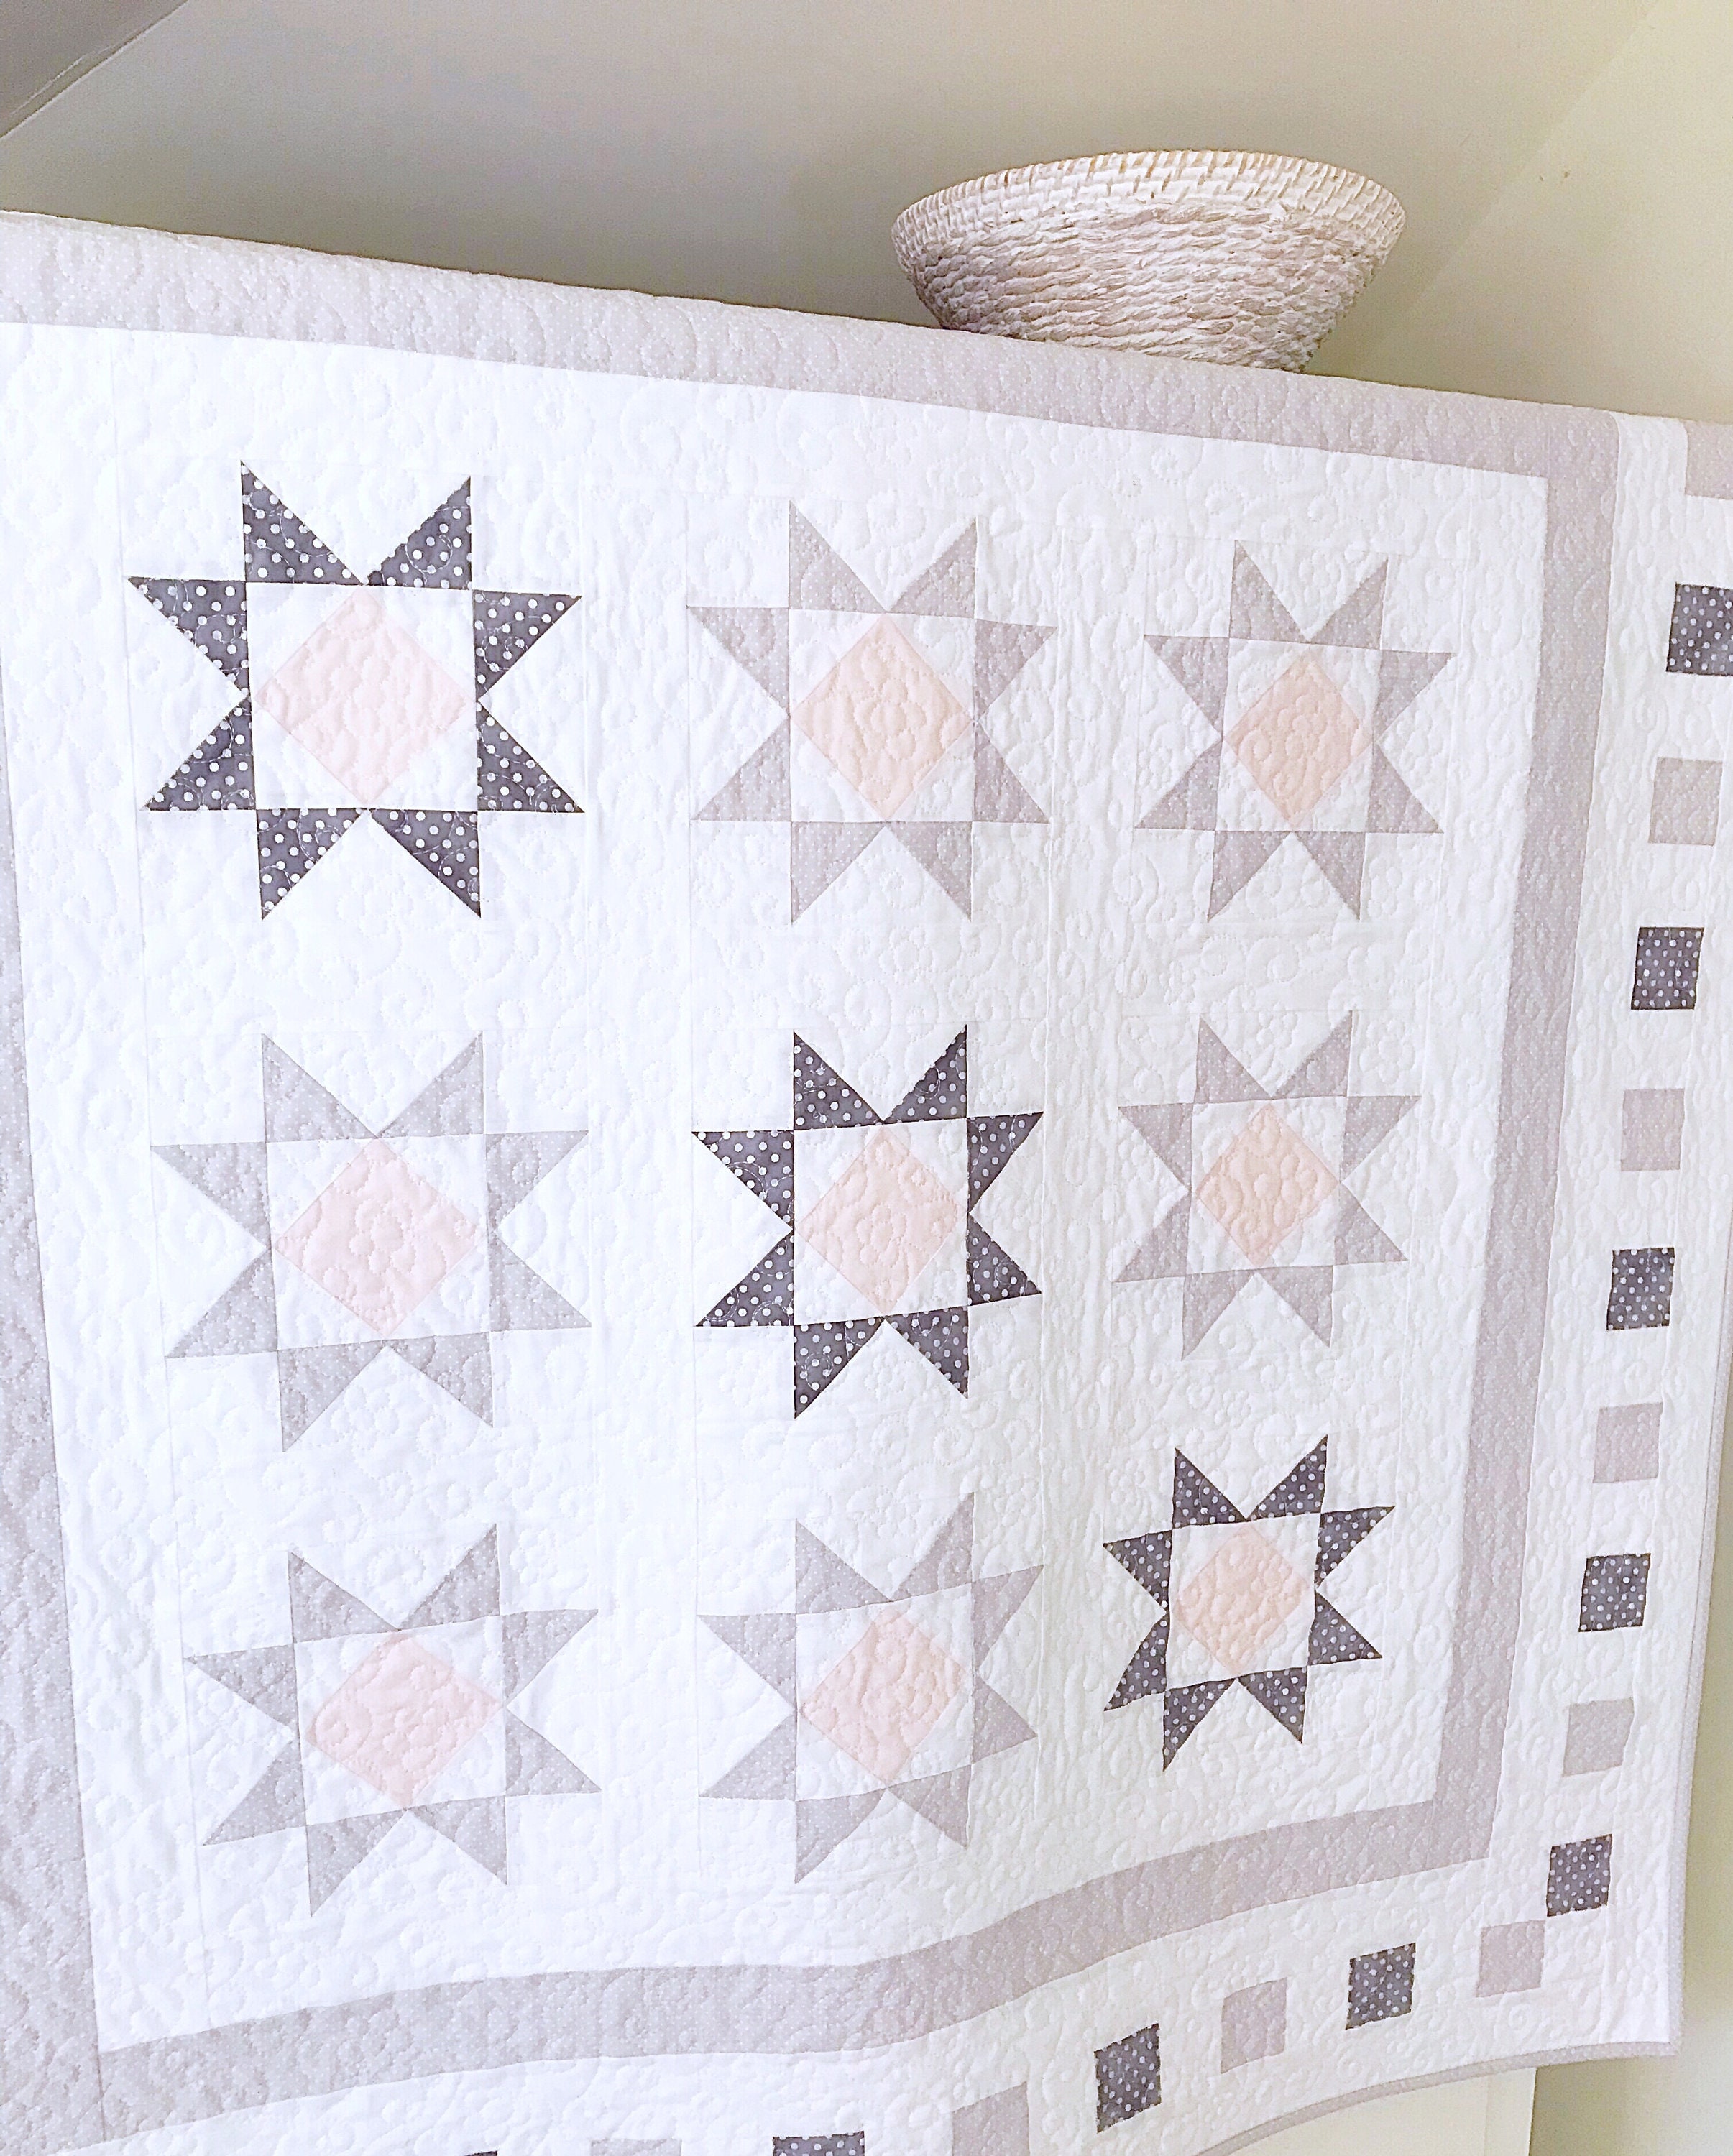 Free Baby Quilt Patterns - Classic, Modern Or Unique Designs ⋆ Hello Sewing